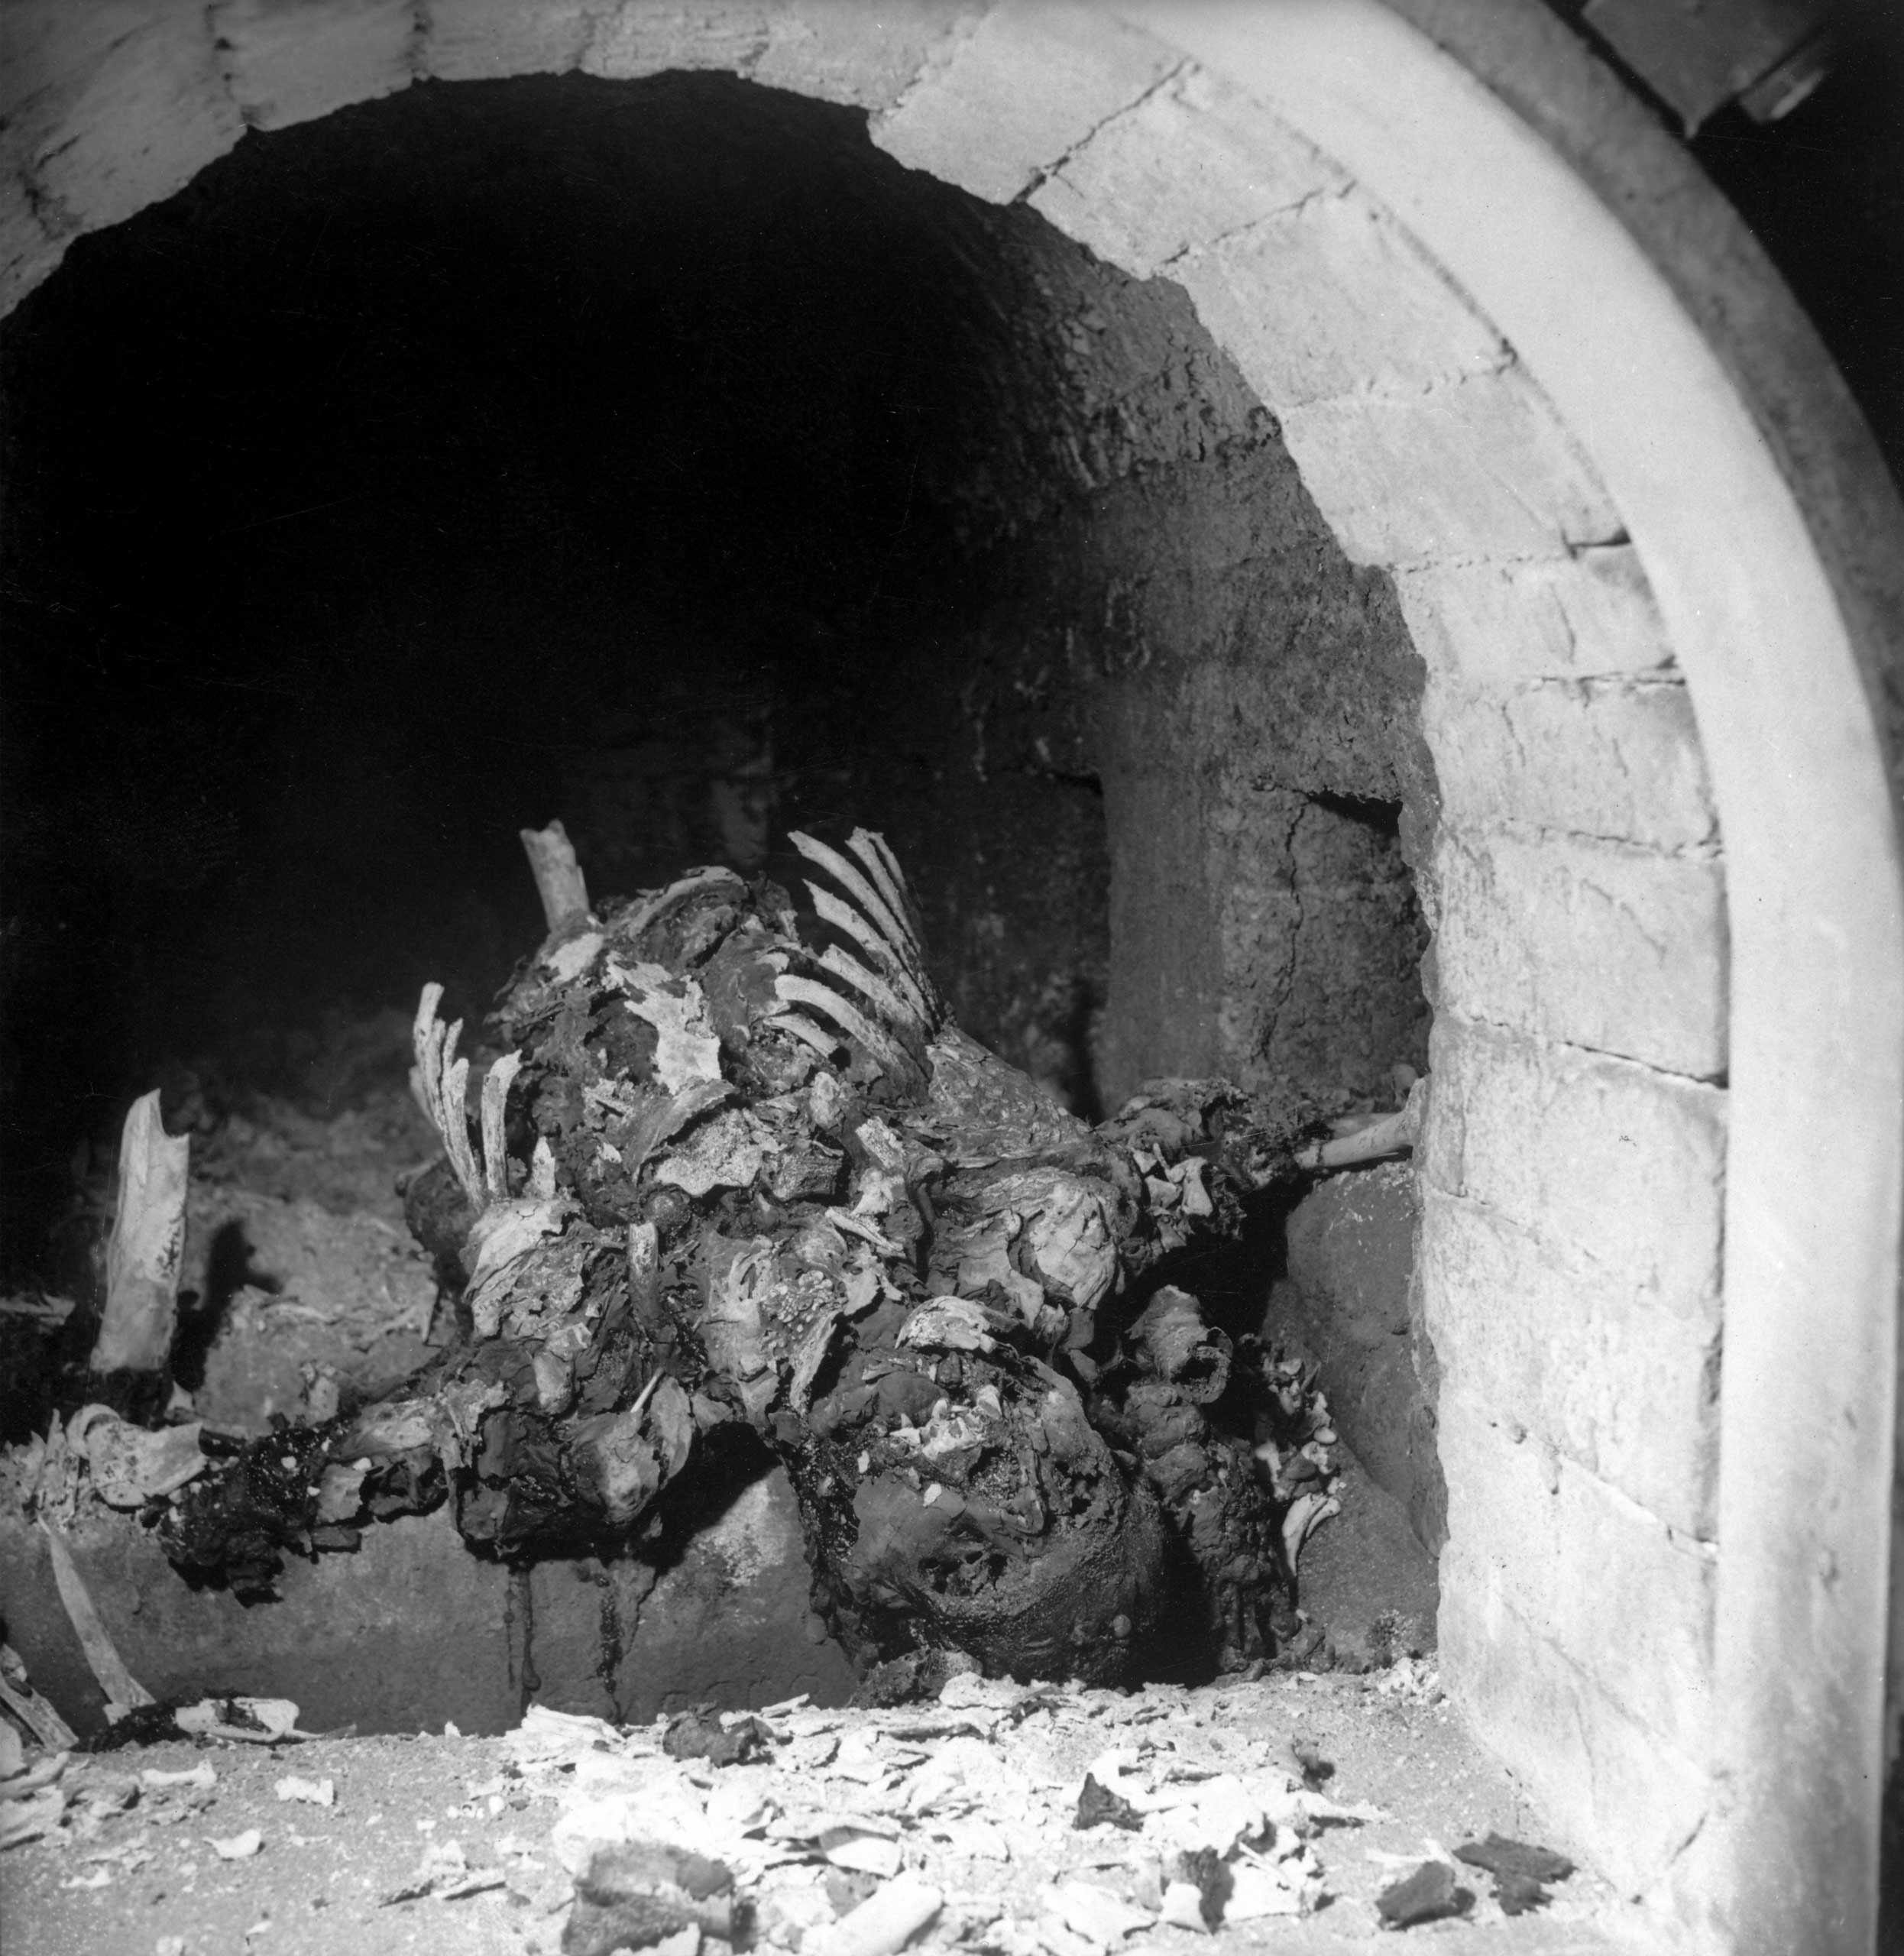 Not published in LIFE. The remains of an incinerated prisoner inside a Buchenwald cremation oven, April 1945.